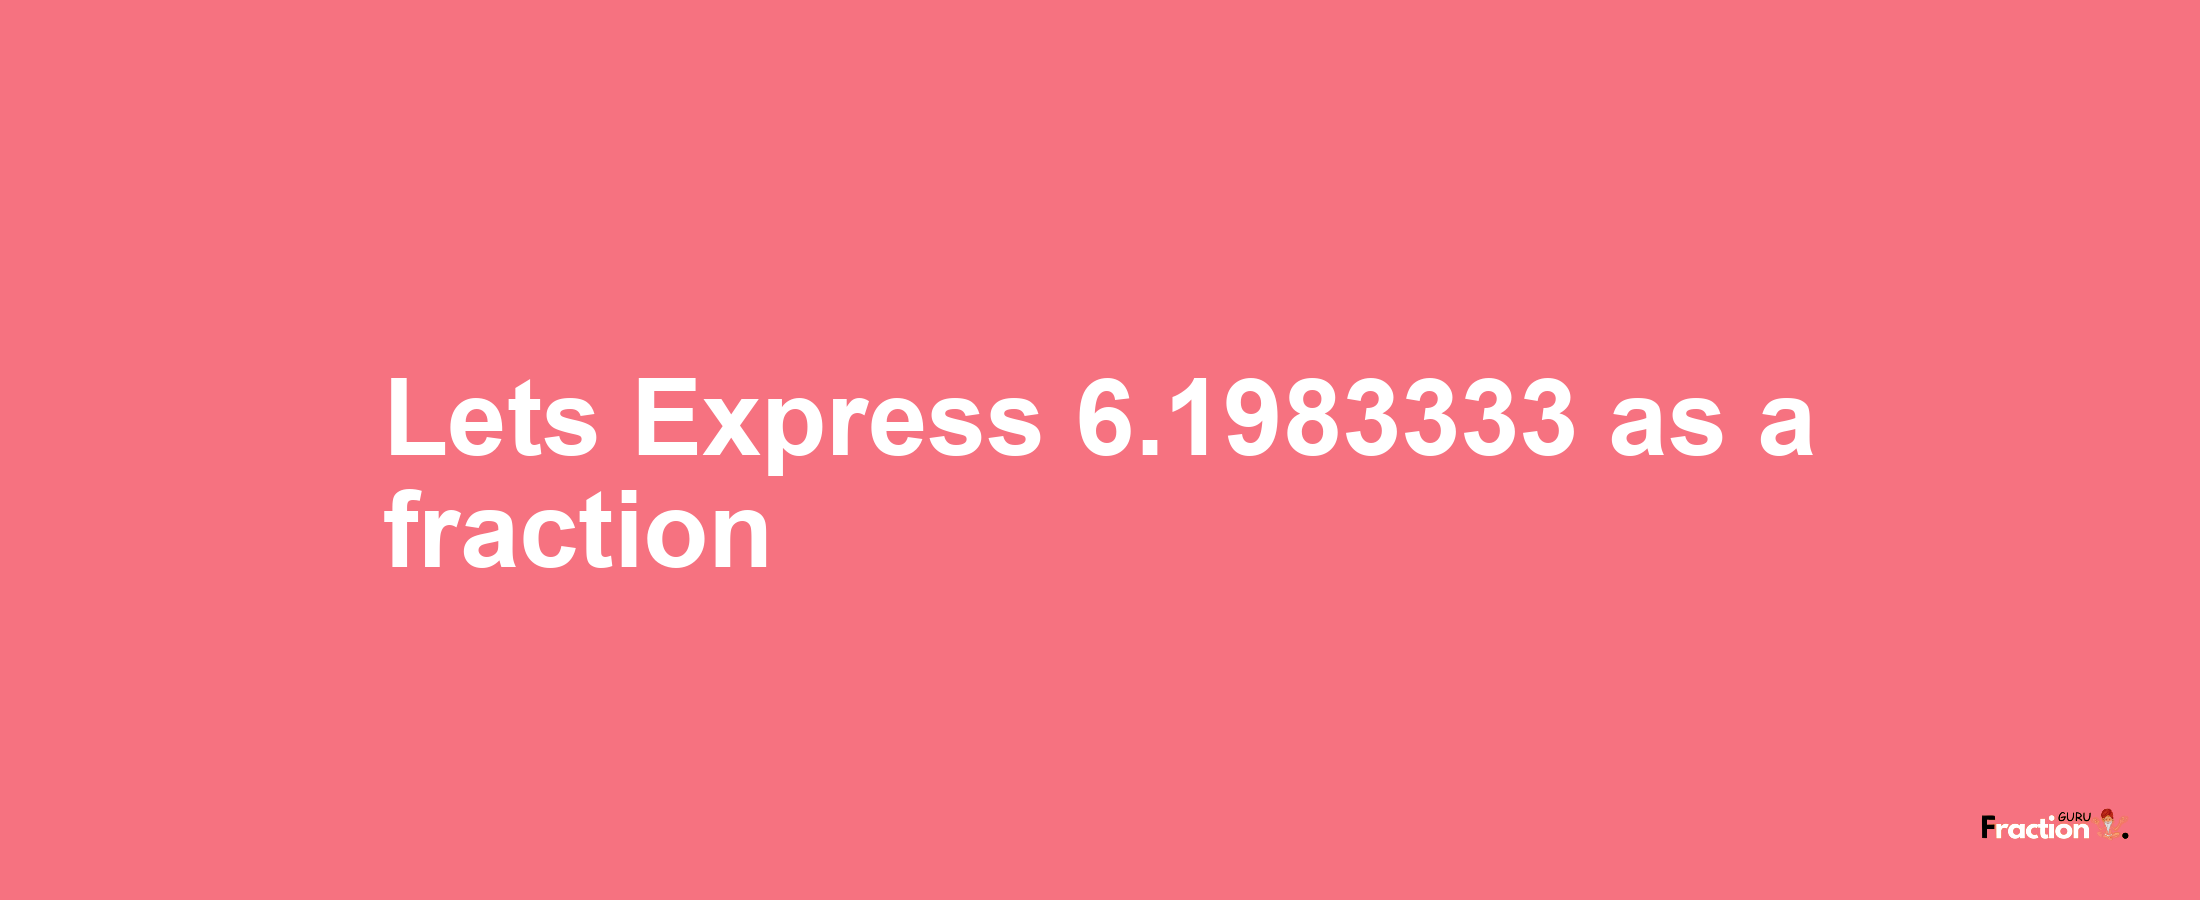 Lets Express 6.1983333 as afraction